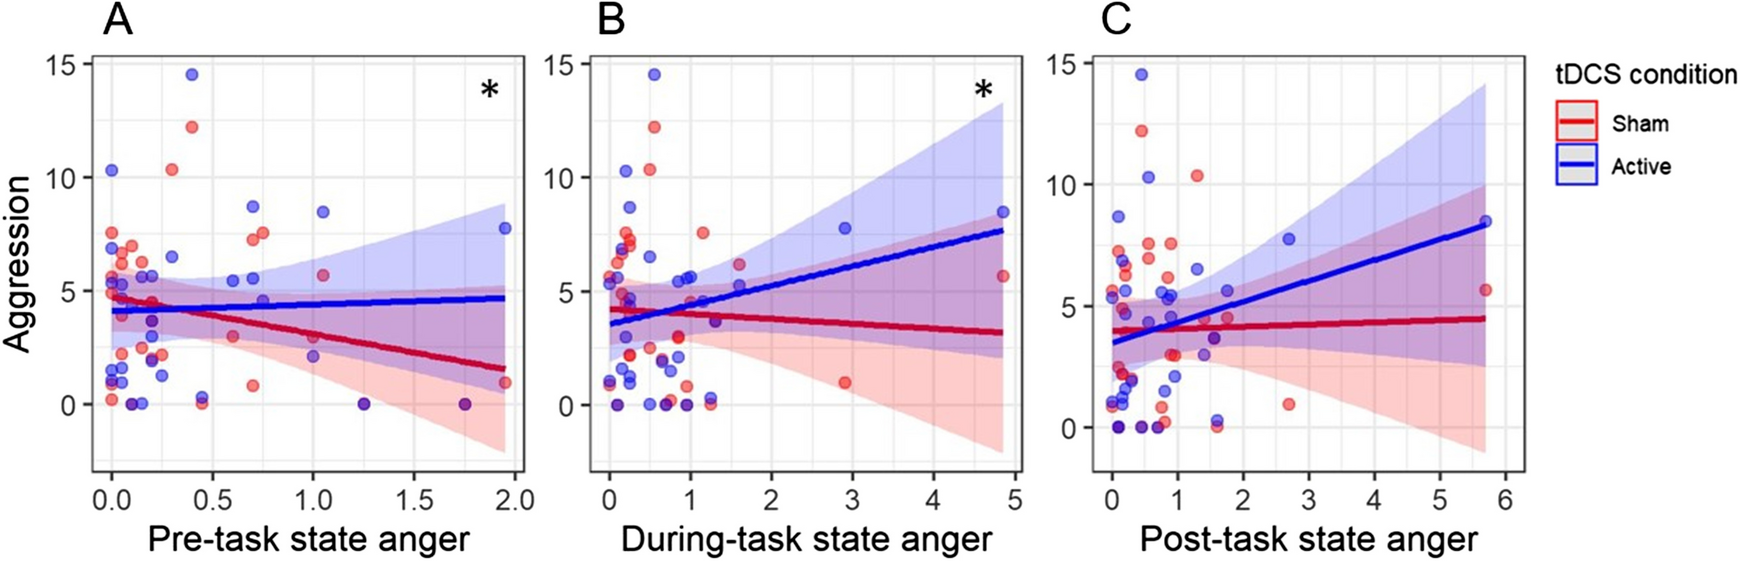 Cerebellar Asymmetry of Motivational Direction: Anger-Dependent Effects of Cerebellar Transcranial Direct Current Stimulation on Aggression in Healthy Volunteers